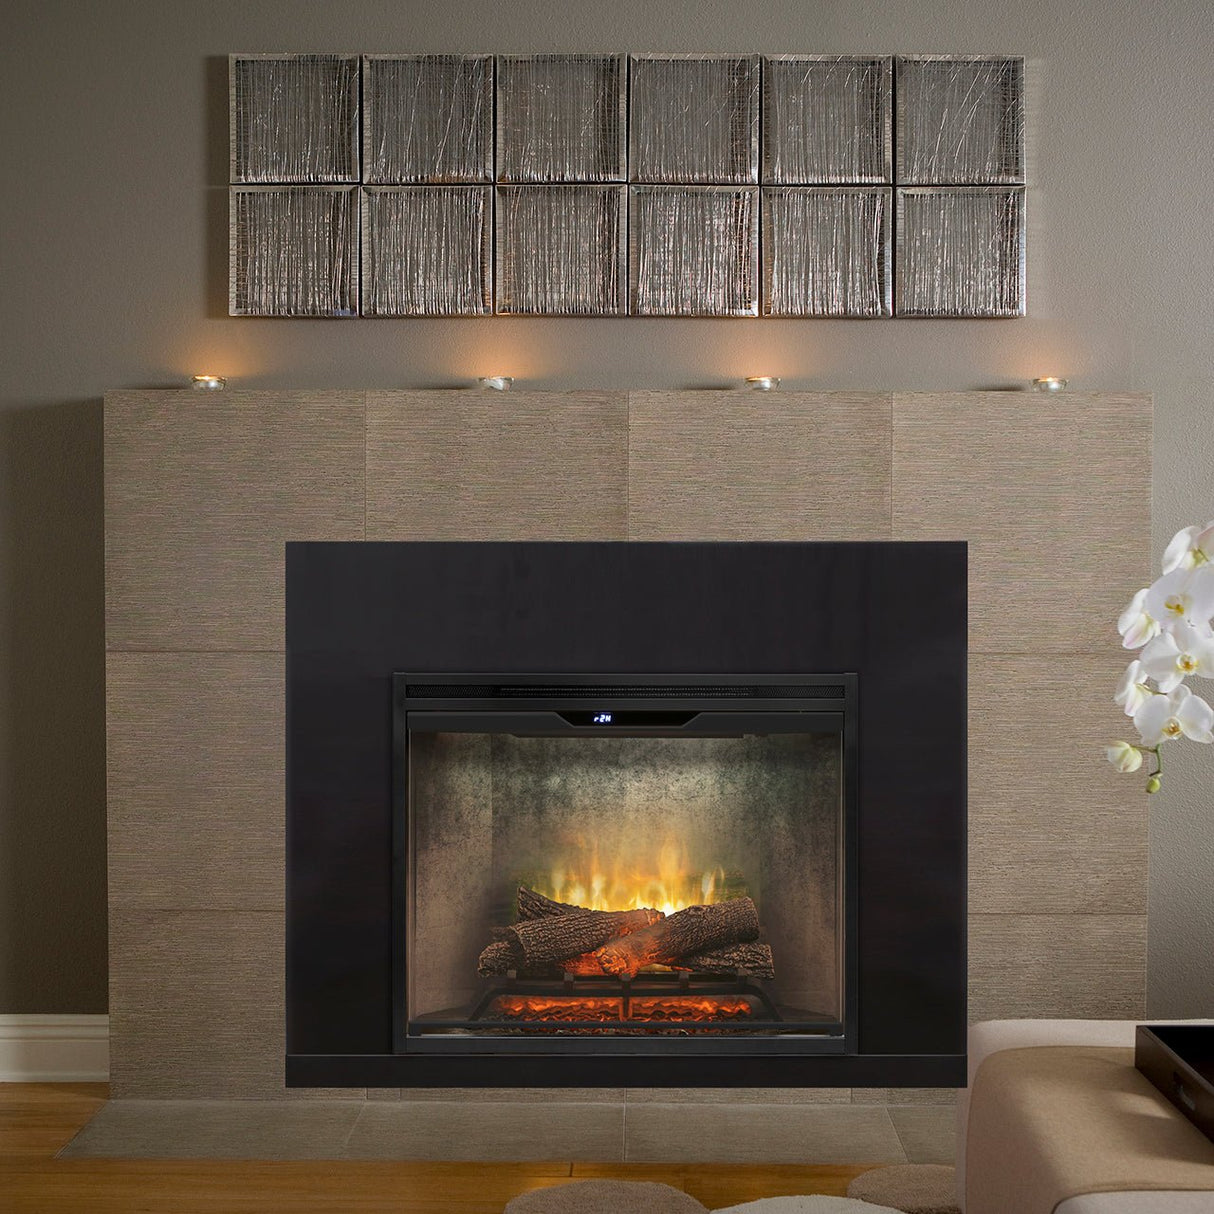 Dimplex - Revillusion 30-Inch Built-In Electric Fireplace - Weathered Concrete Gray